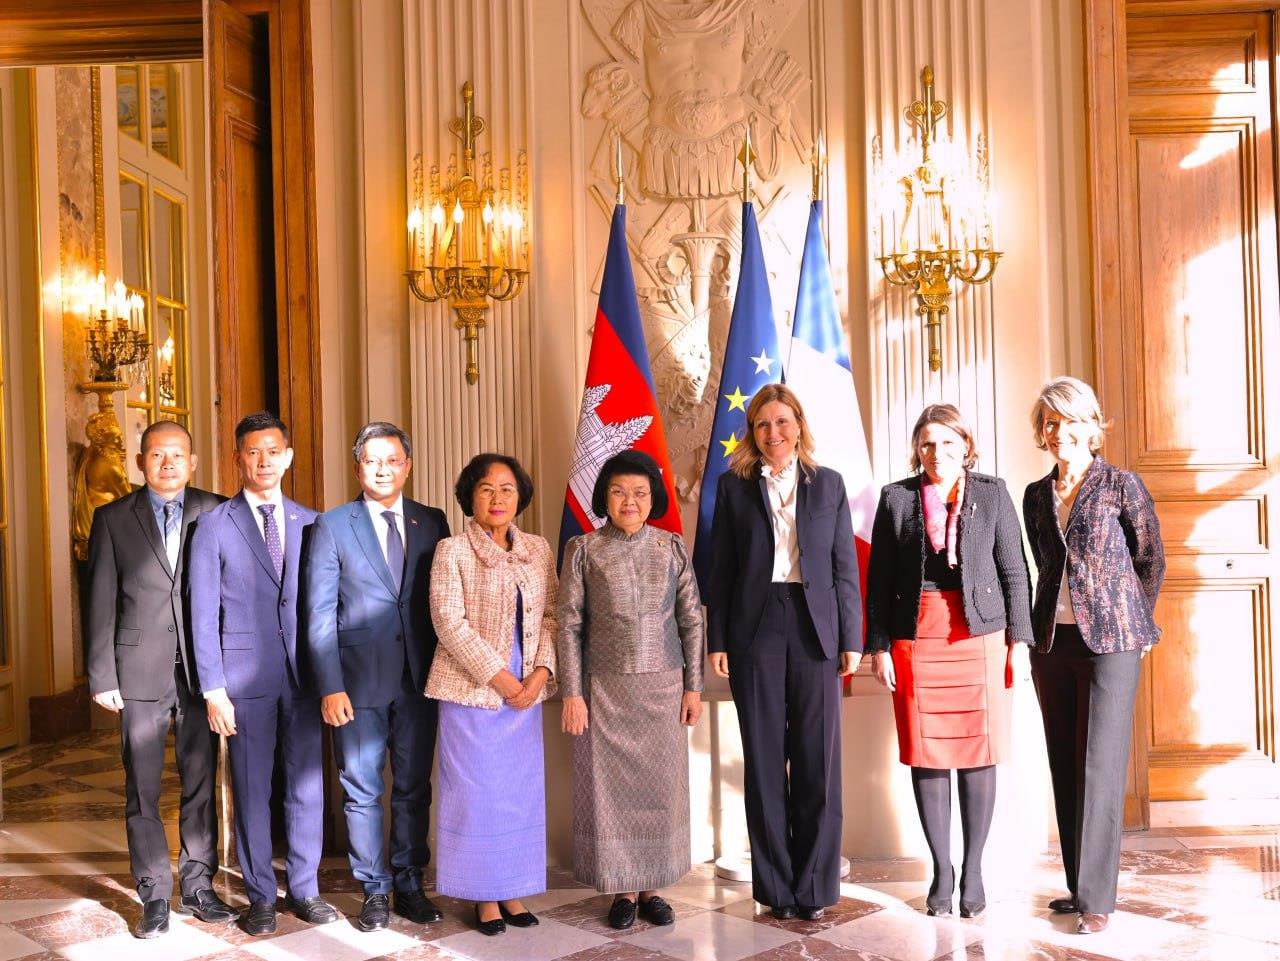 The French House Speaker highly appreciates the participation of Cambodian National Assembly President in the Summit of the Speaker of the Women's Parliament in the French Republic